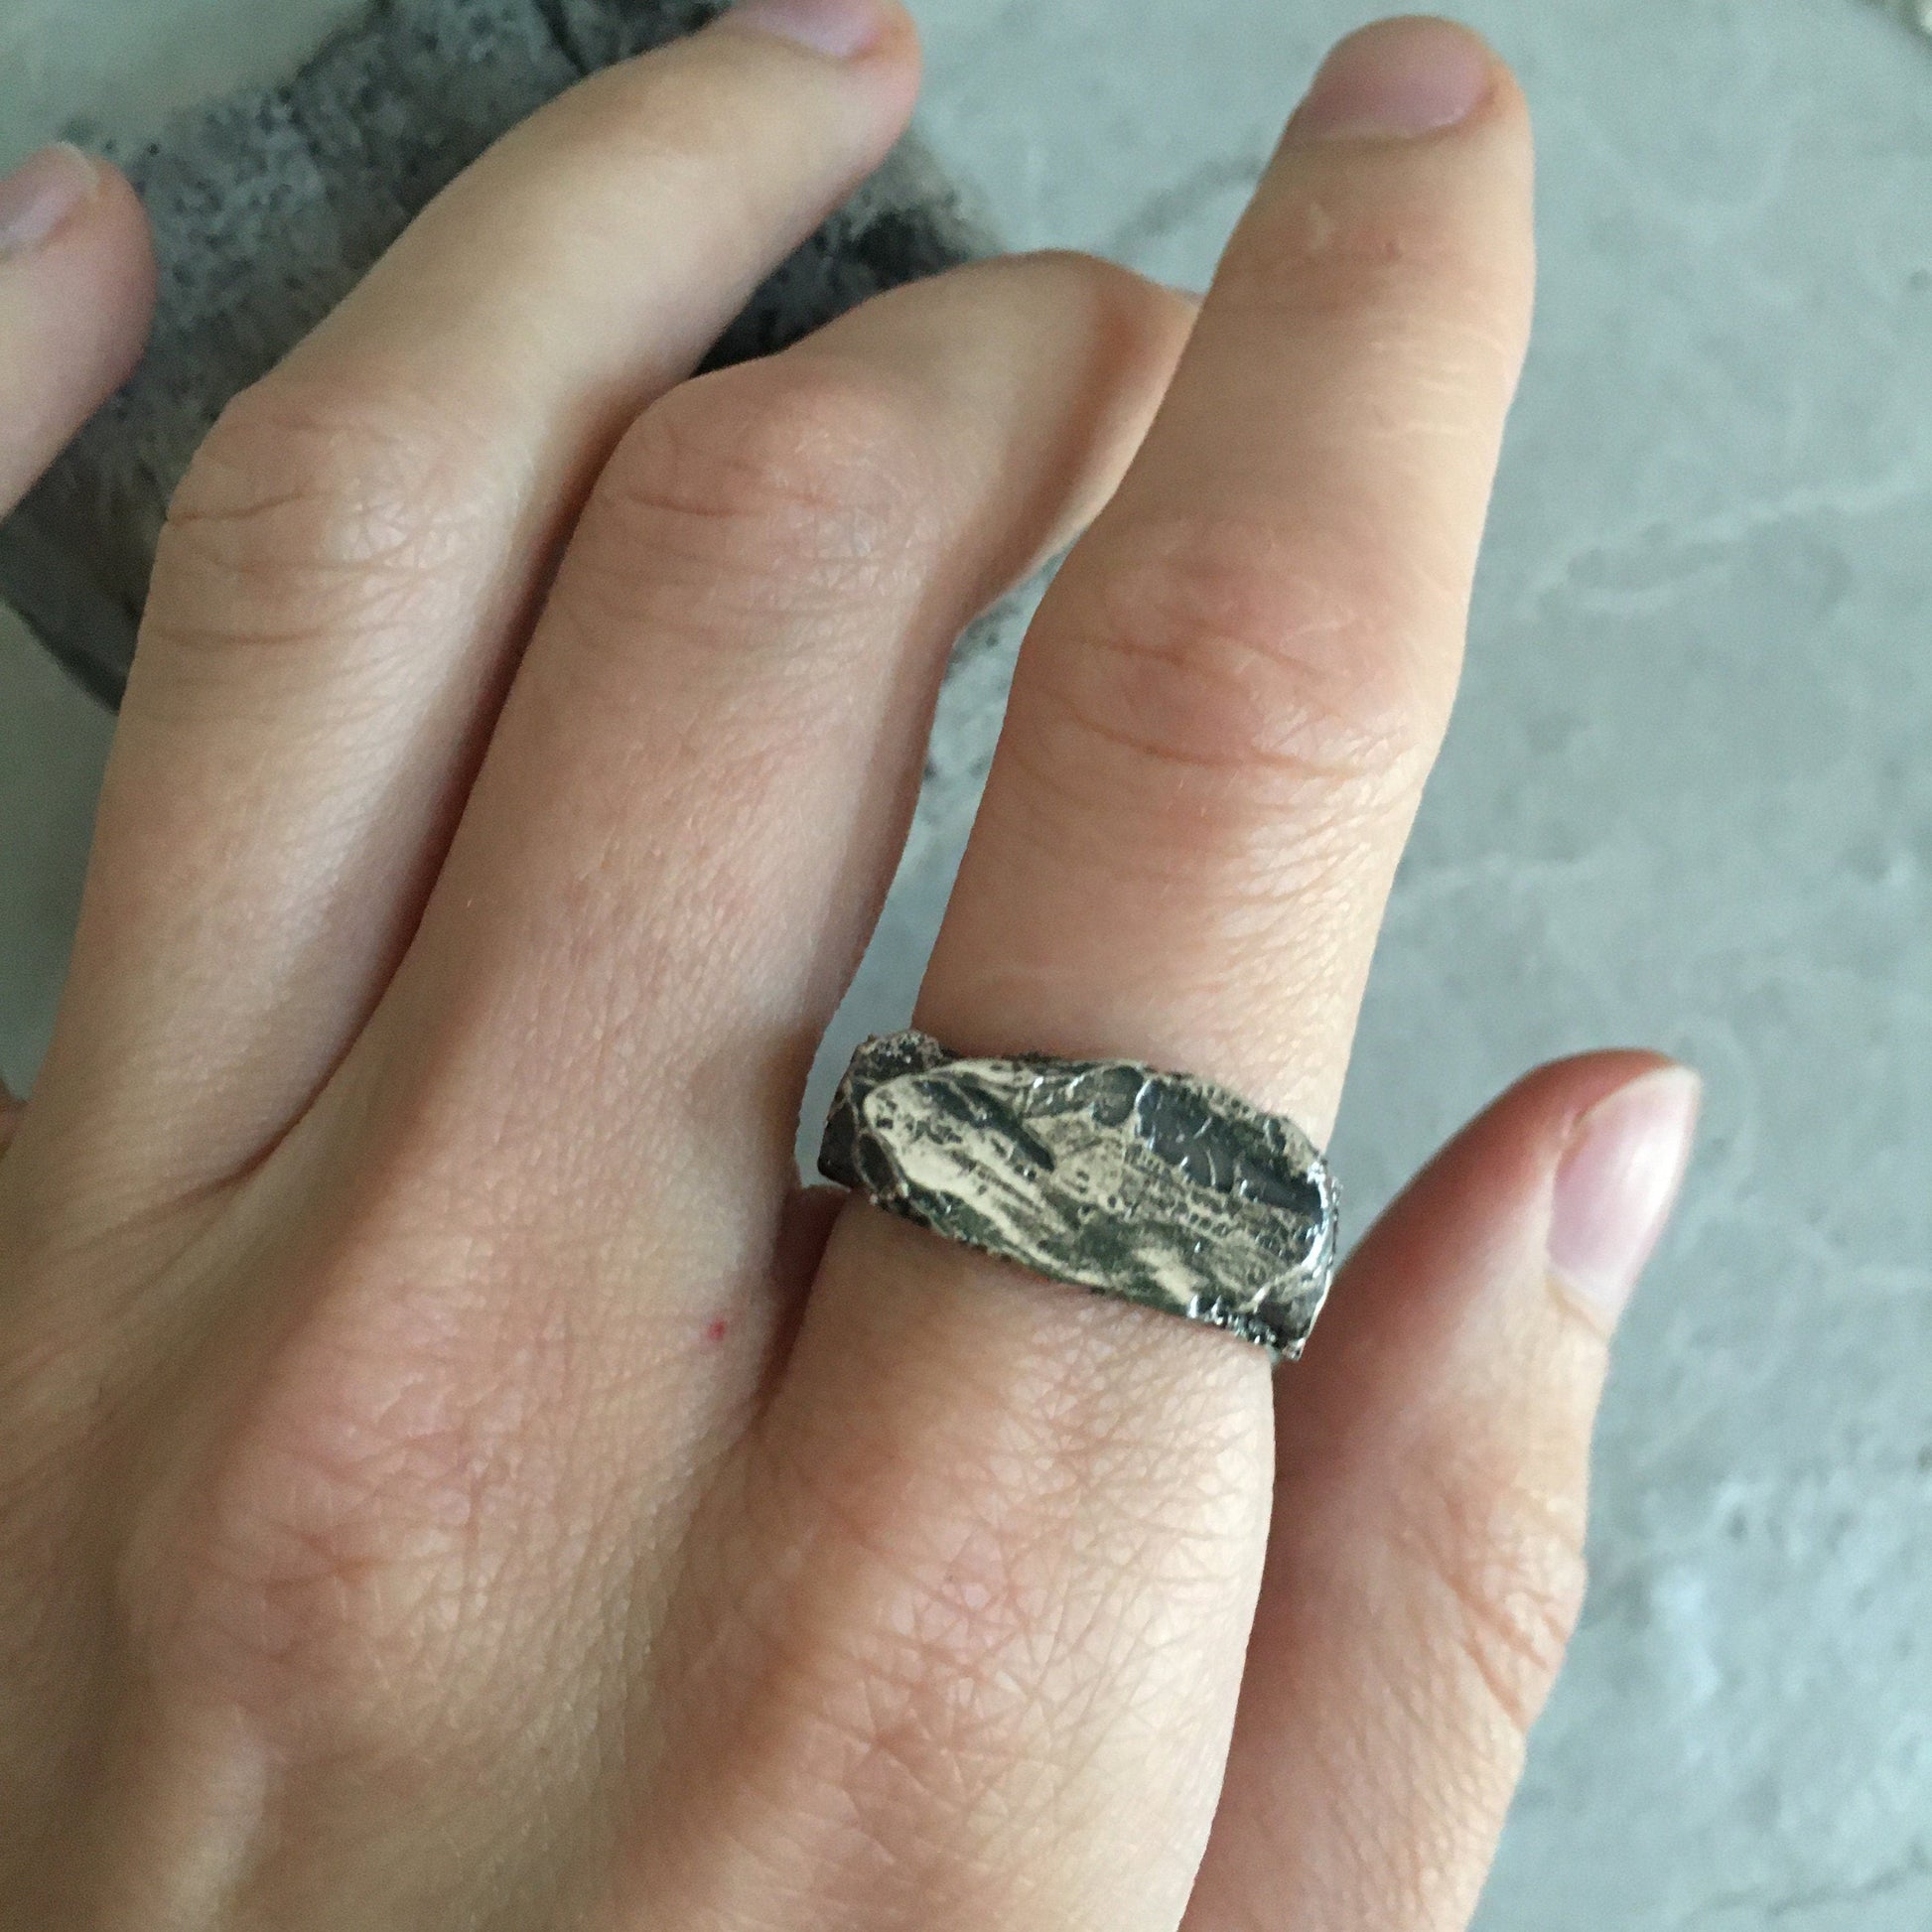 Ocean ring- horizontal signet ring with an unusual texture of stone and molten metal Signet rings Project50g 